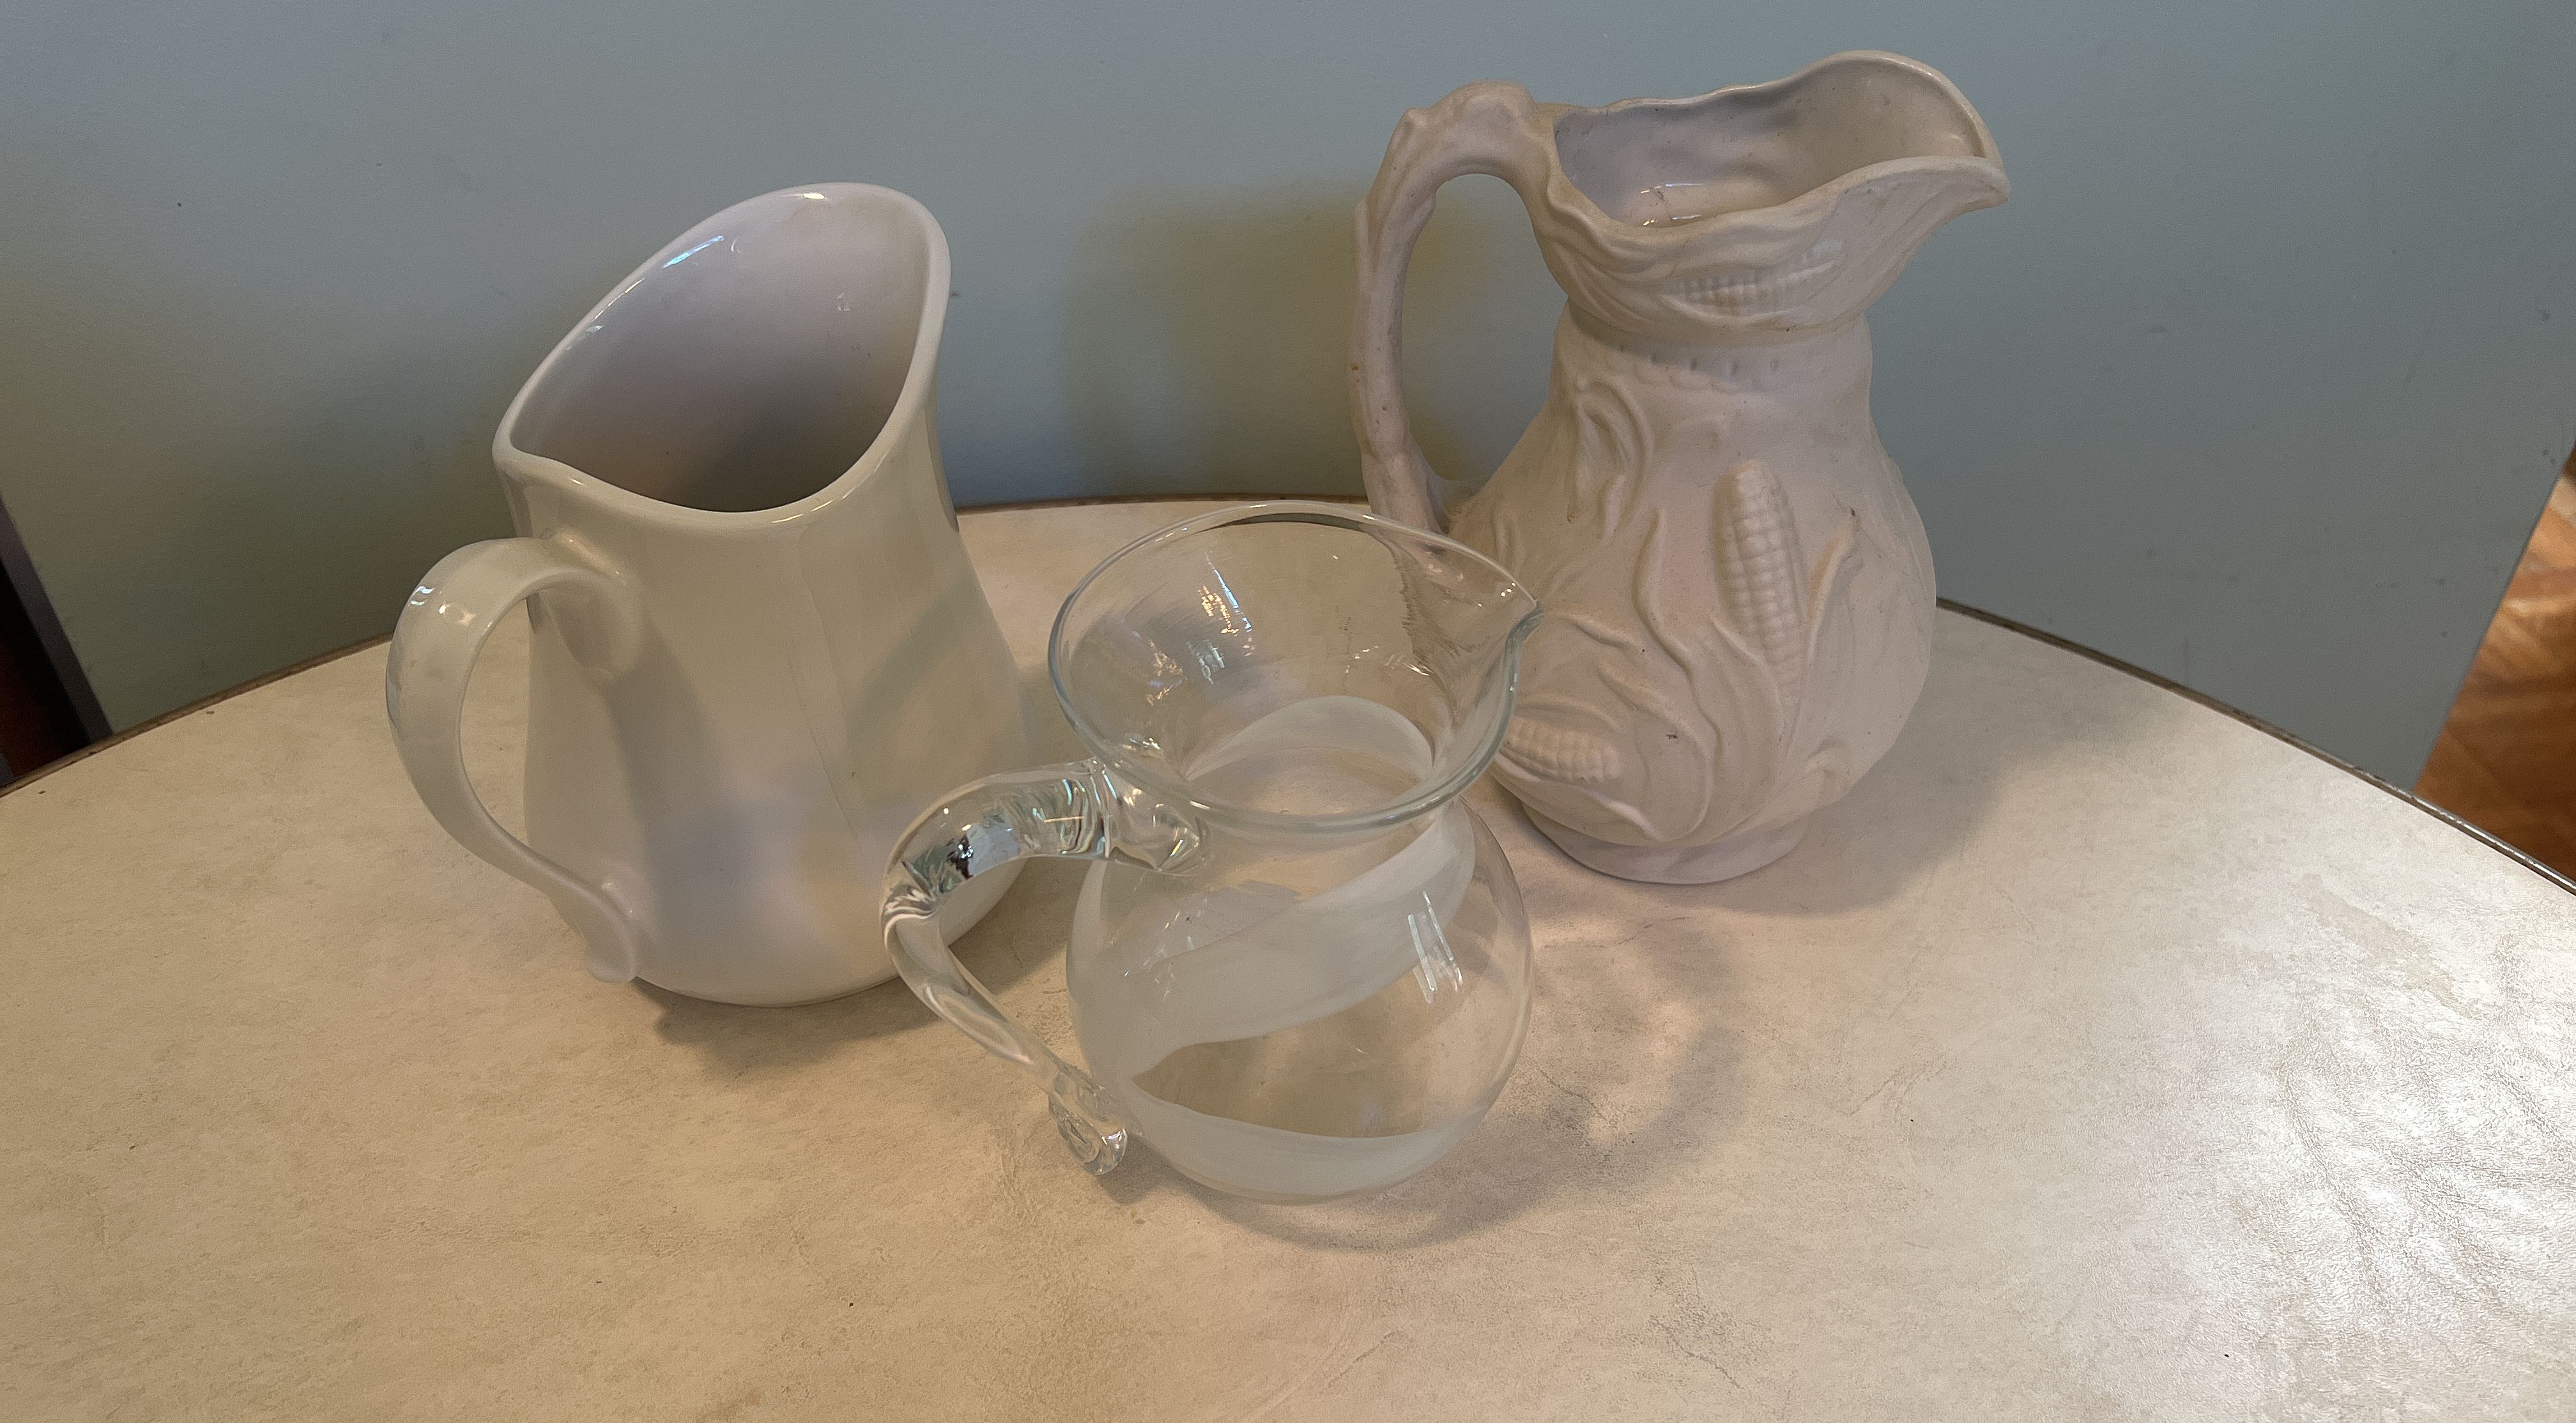 Sold at Auction: Three Art Glass Water Pitchers